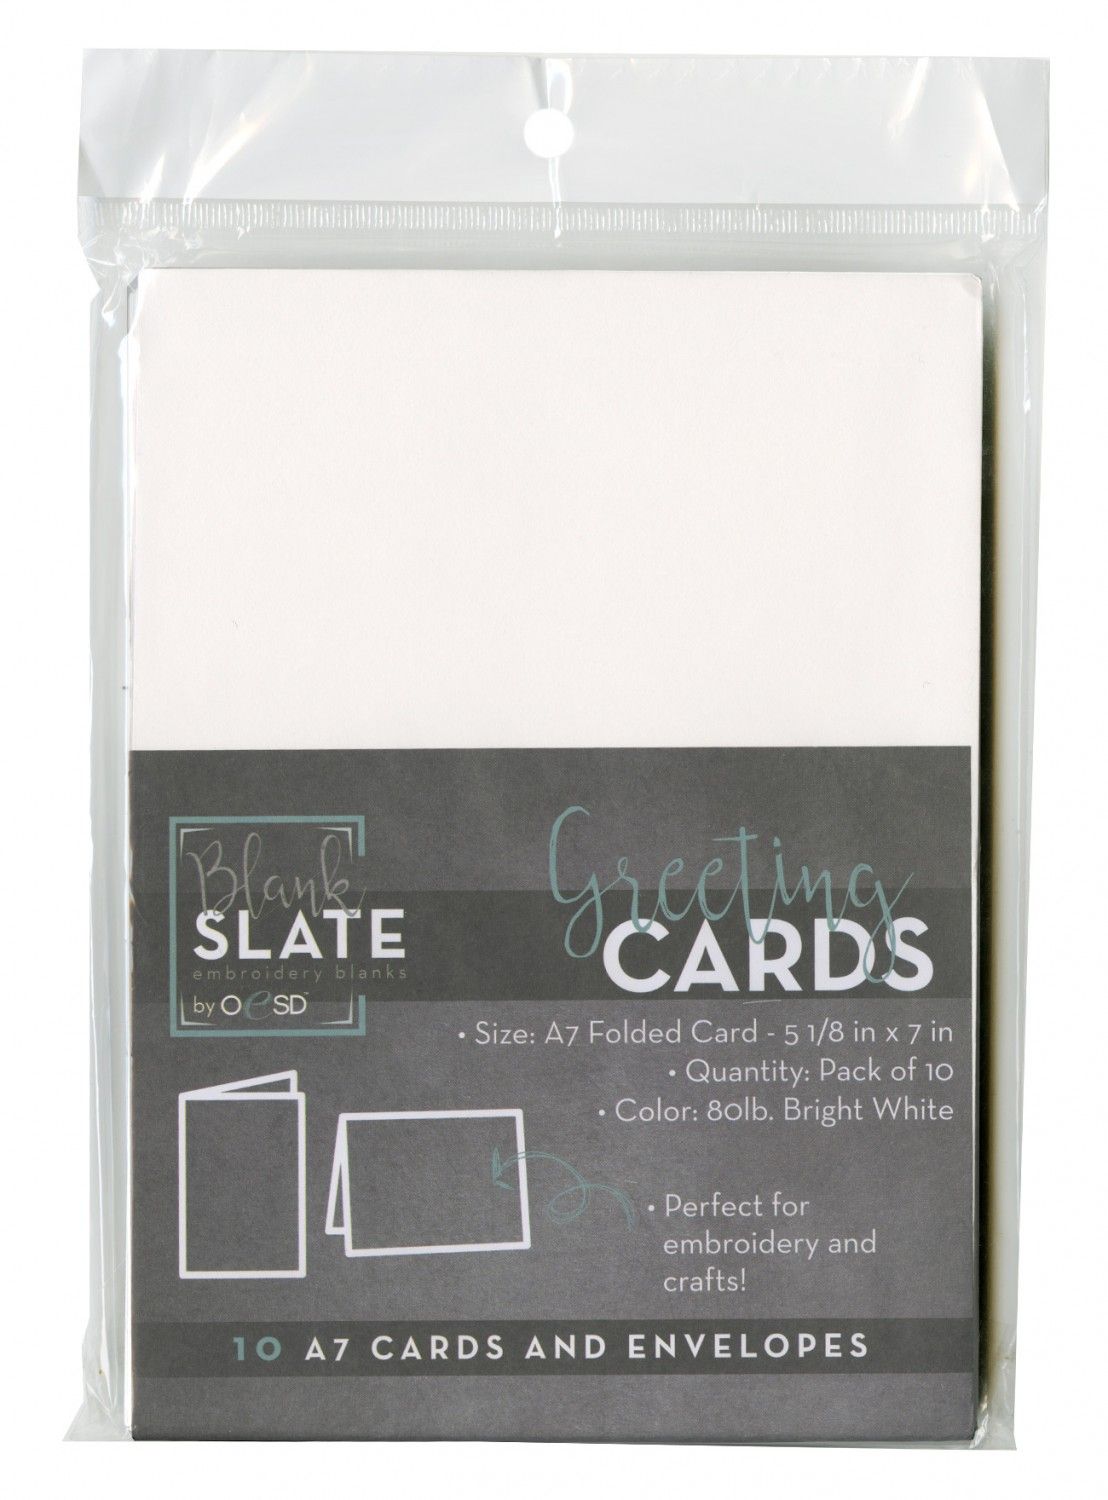 Blank Greeting Cards & Envelopes - Size A7 - 10pk